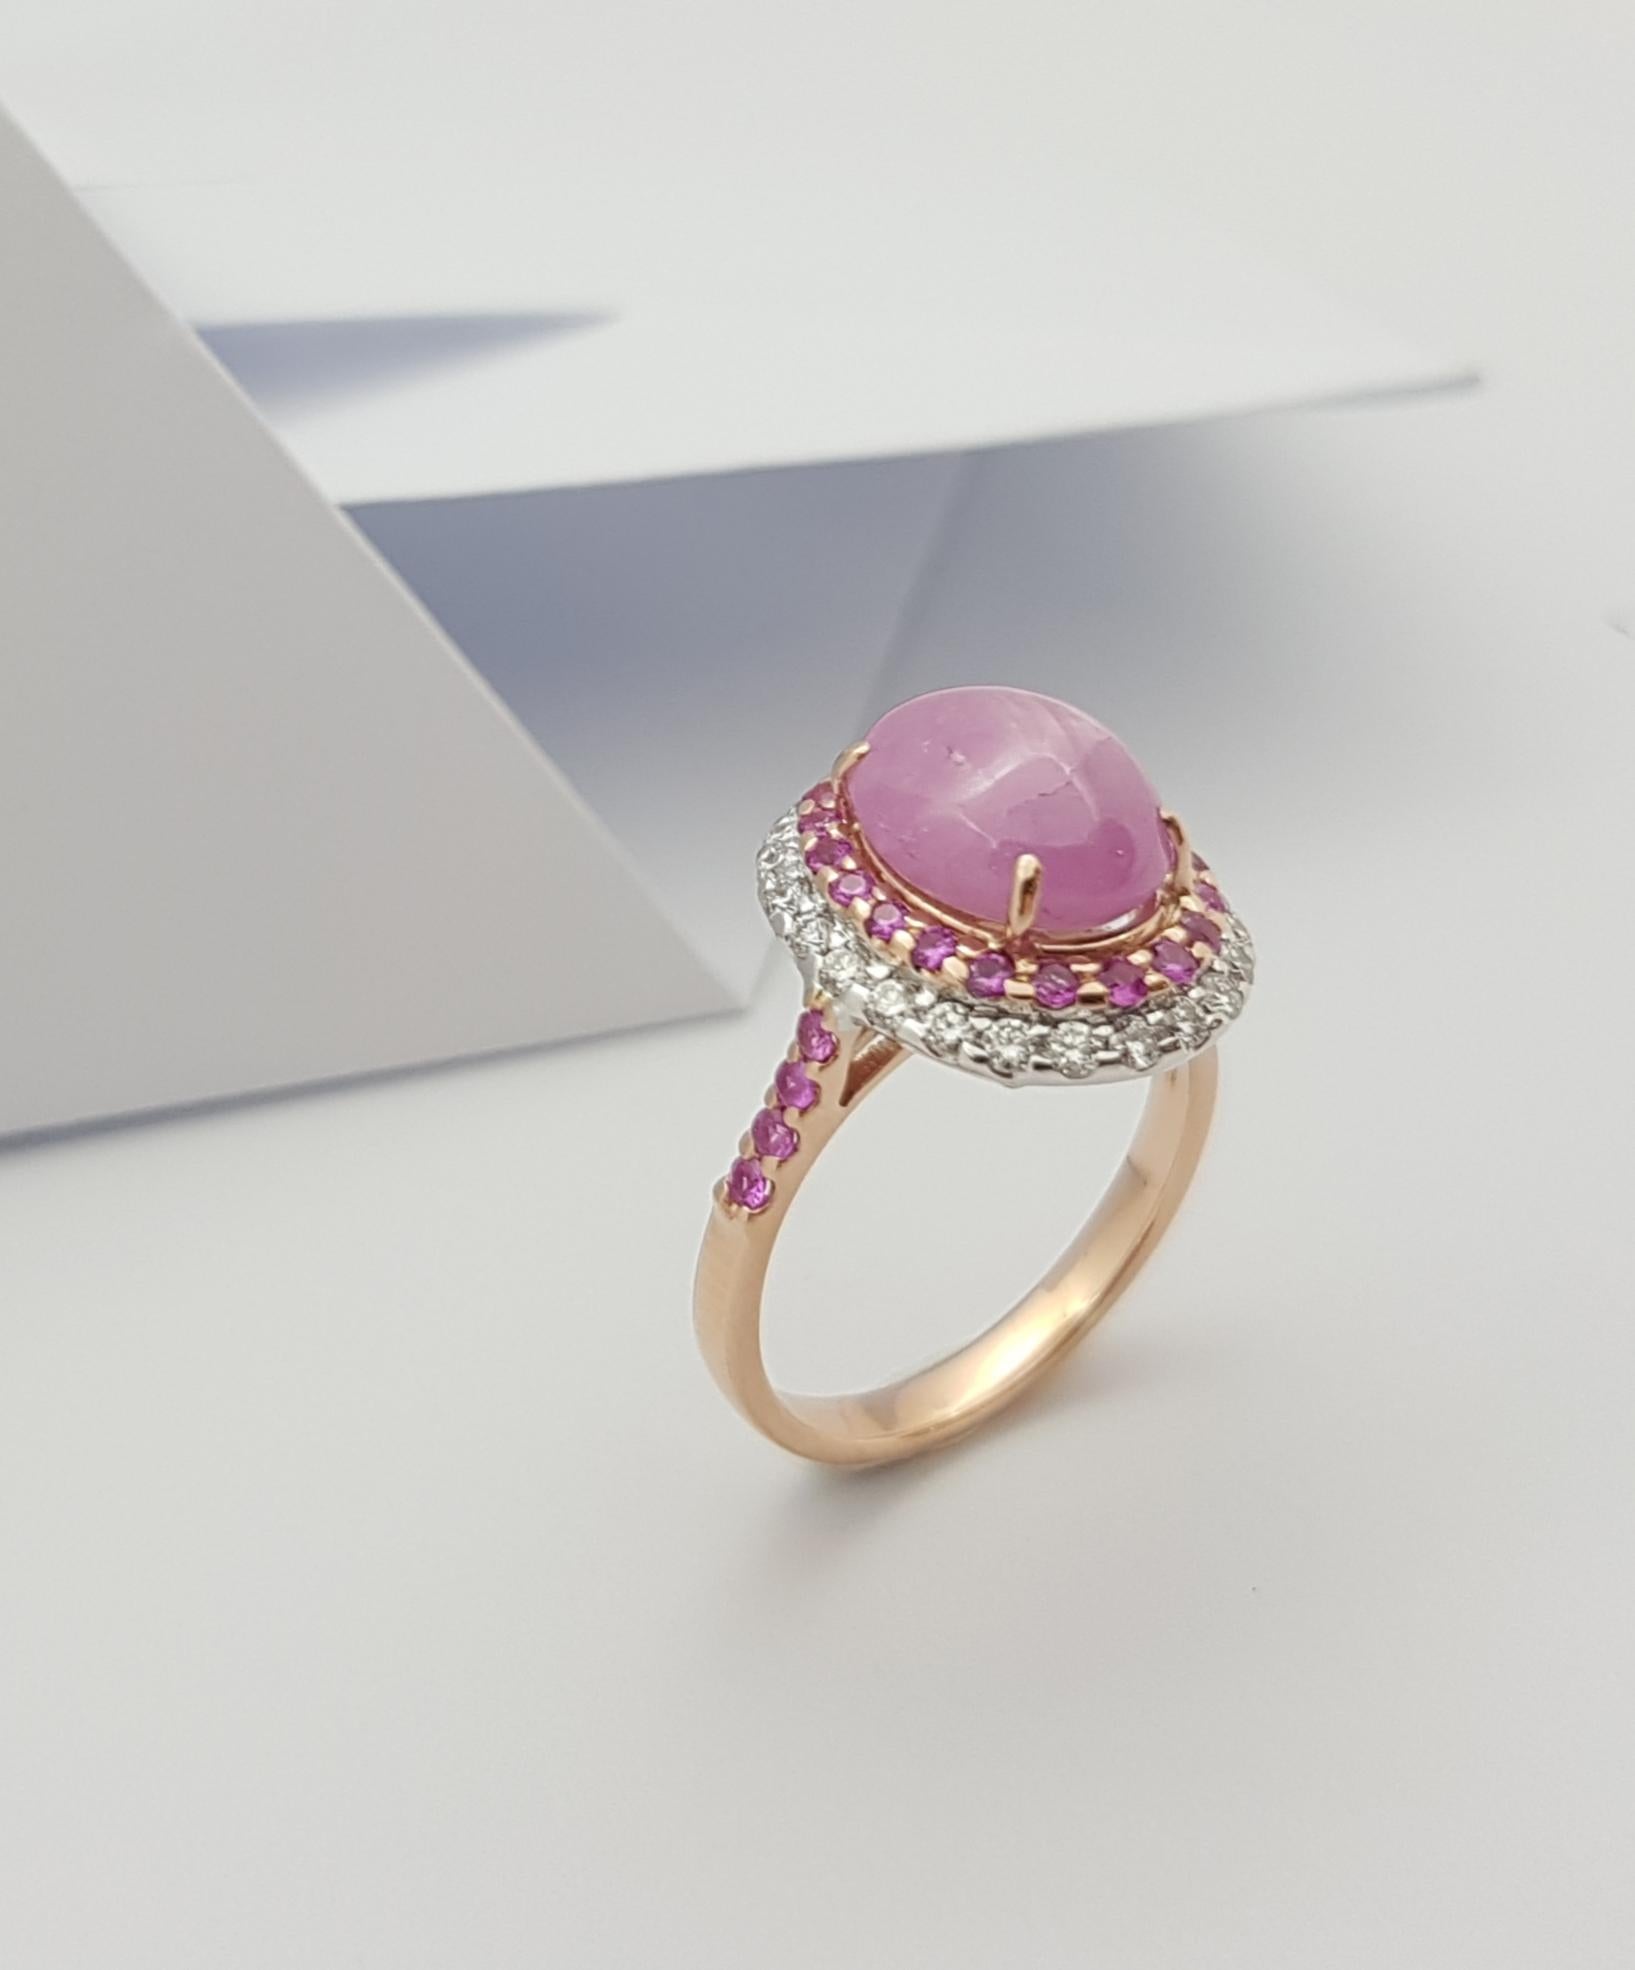 Certified Unheated Star Pink Sapphire, Diamond Ring in 18K Rose Gold For Sale 5